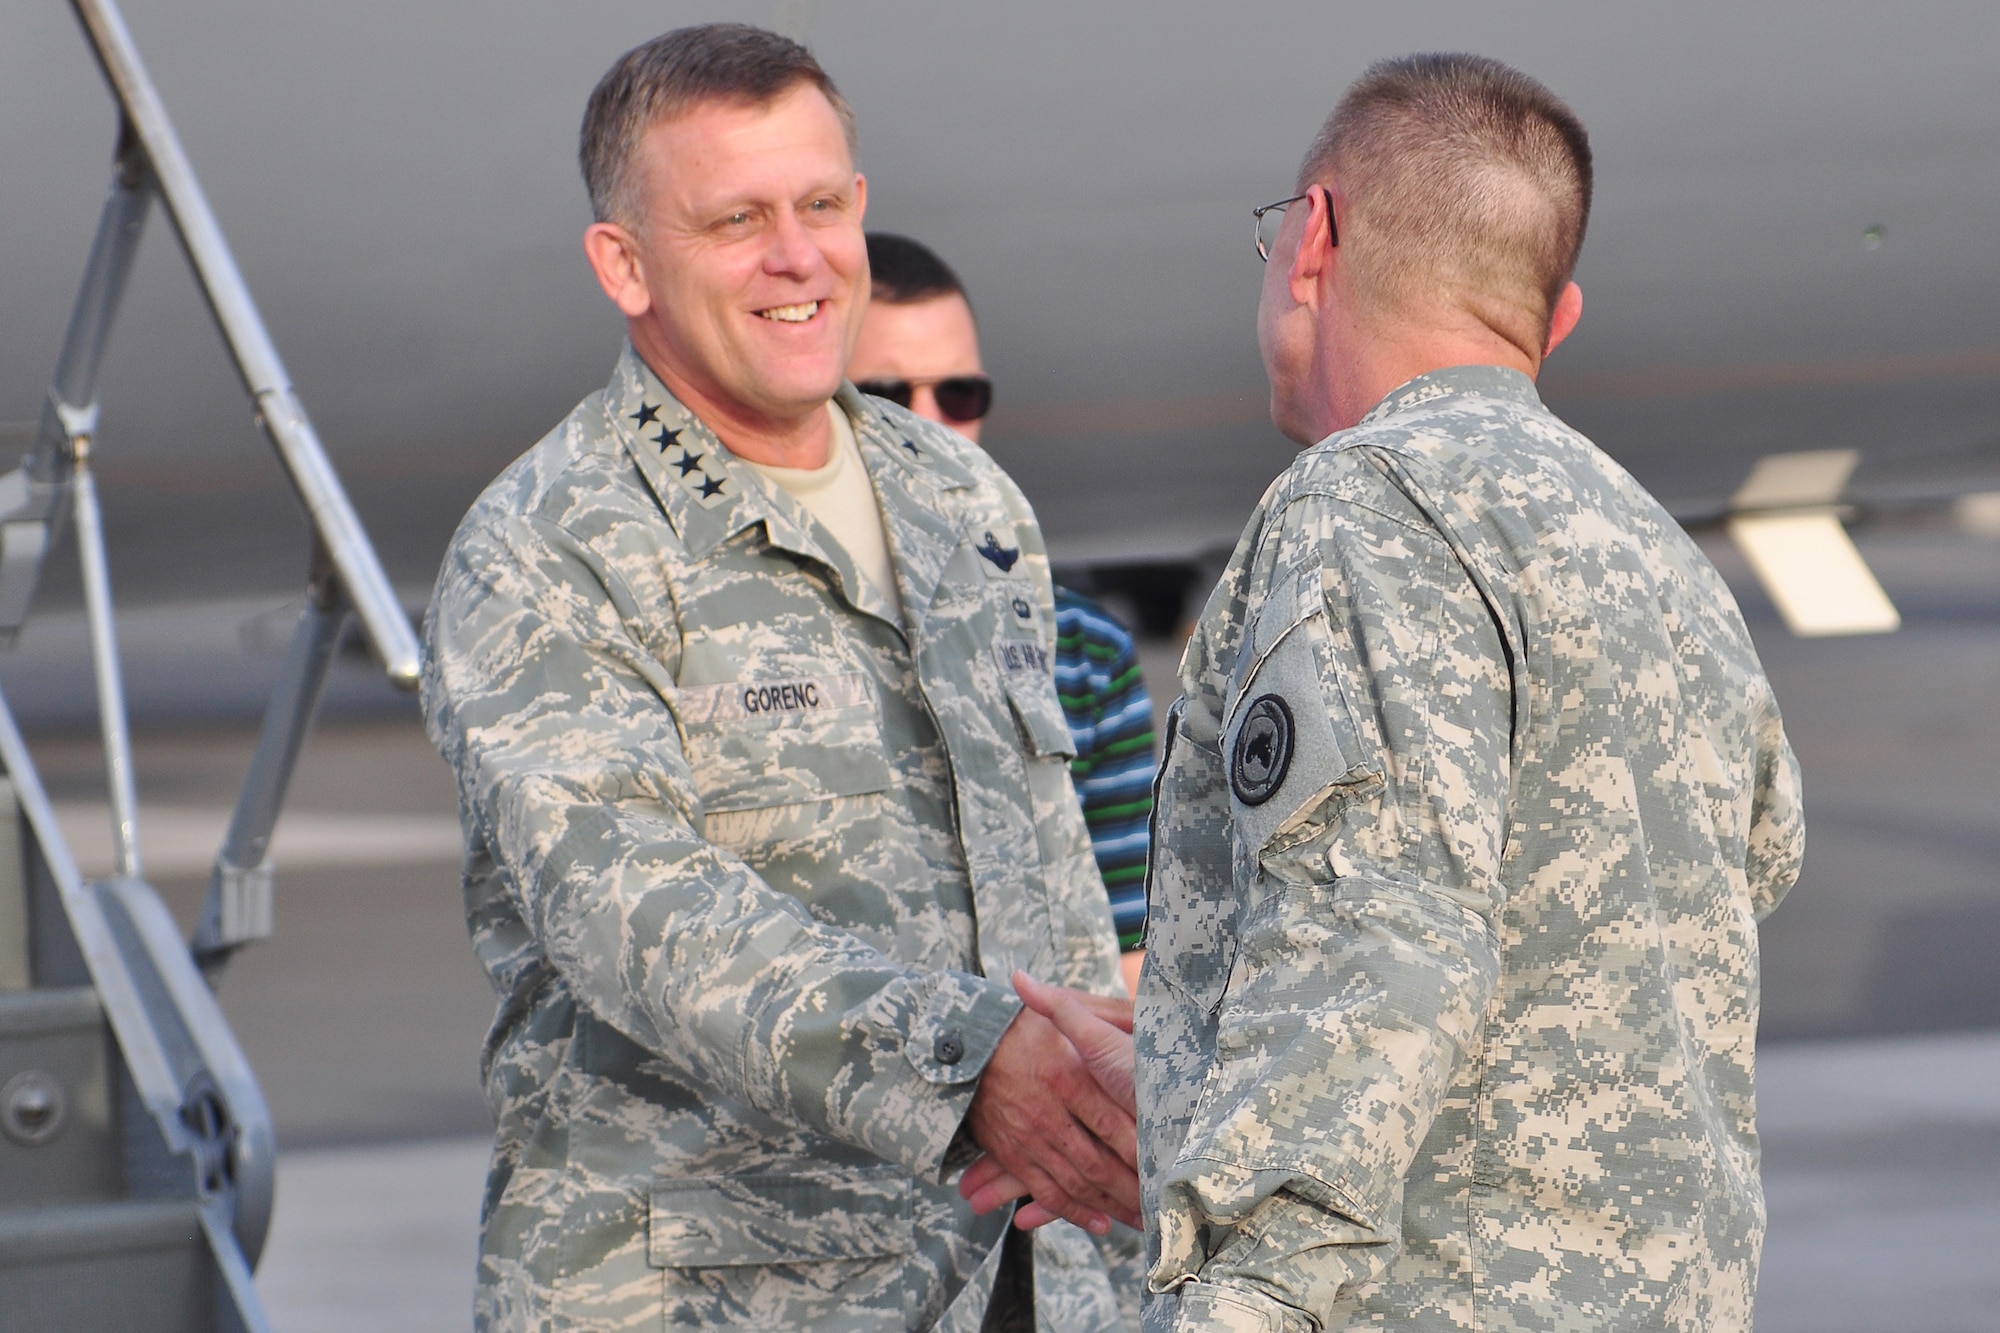 U.S. Air Force Gen. U.S. Air Force Gen. Frank Gorenc, U.S. Air Forces in Europe and Air Forces Africa commander, meets U.S. Army Maj. Gen. Terry Ferrell, commanding general of Combined Joint Task Force-Horn of Africa, as he gets off a plane at Camp Lemonnier, Djibouti, Aug. 22, 2013. This was Gorenc ‘s first trip to Africa since taking command of USAFE/AFAFRICA and he used the trip to familiarize himself with CJTF-HOA’s mission of stabilizing and strengthening security in East Africa through military-to-military engagements with partner nations. (U.S. Air Force photo by Tech. Sgt. Chad Thompson)